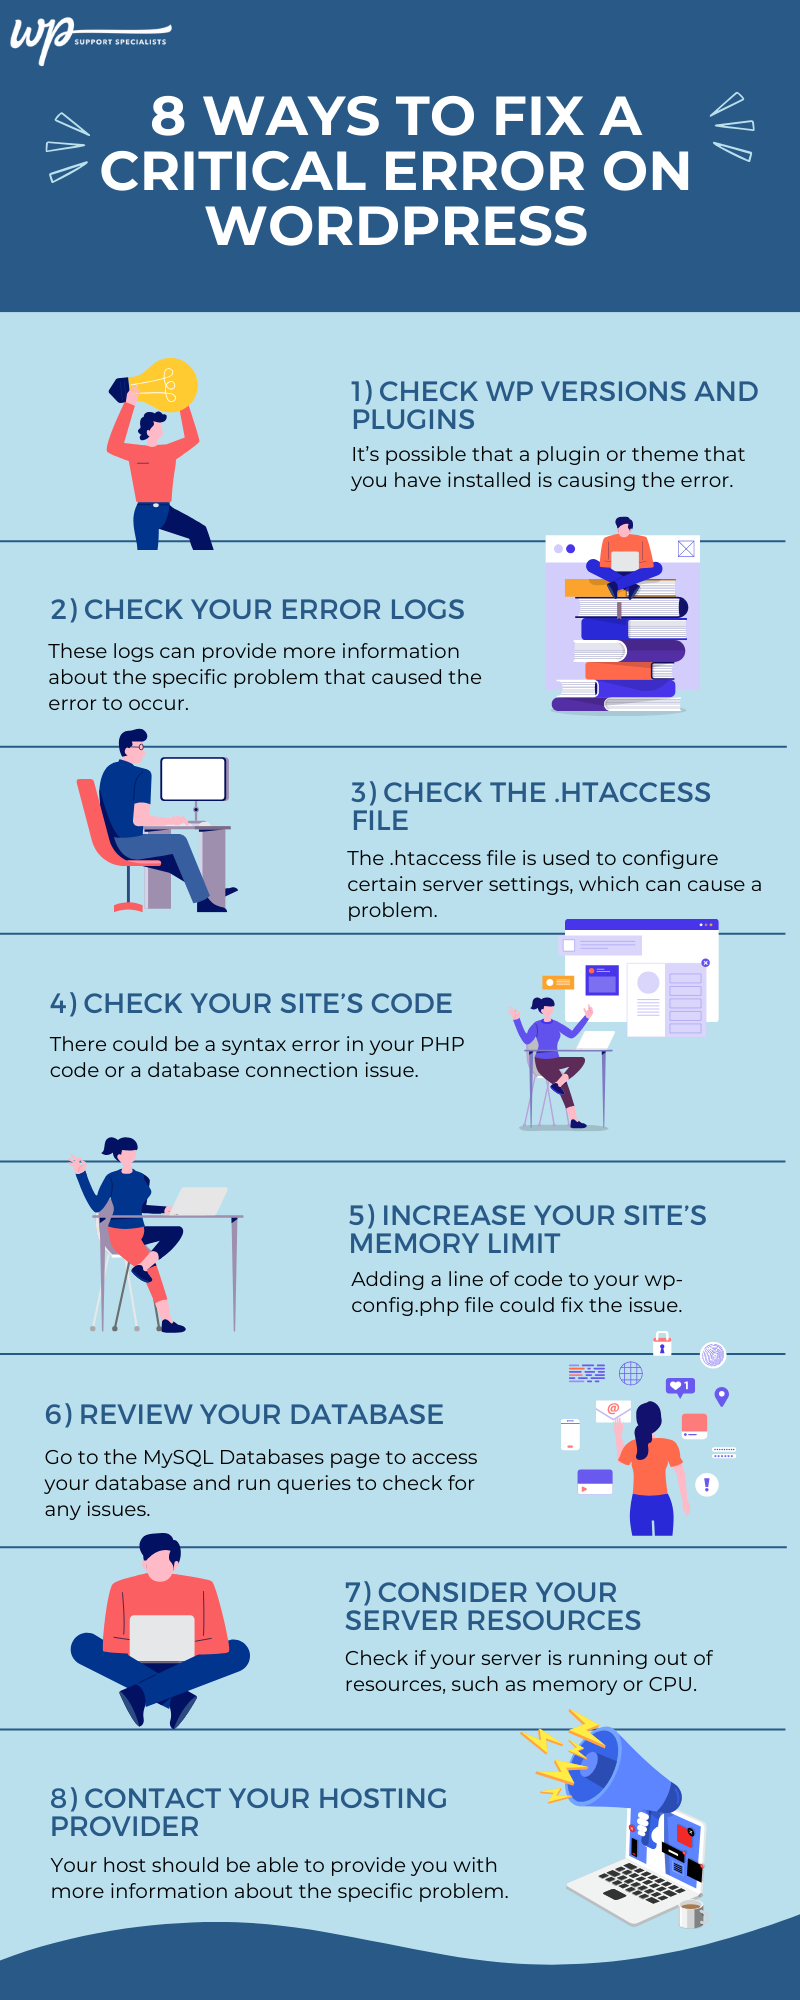 infographic on how to fix a critical error on wordpress